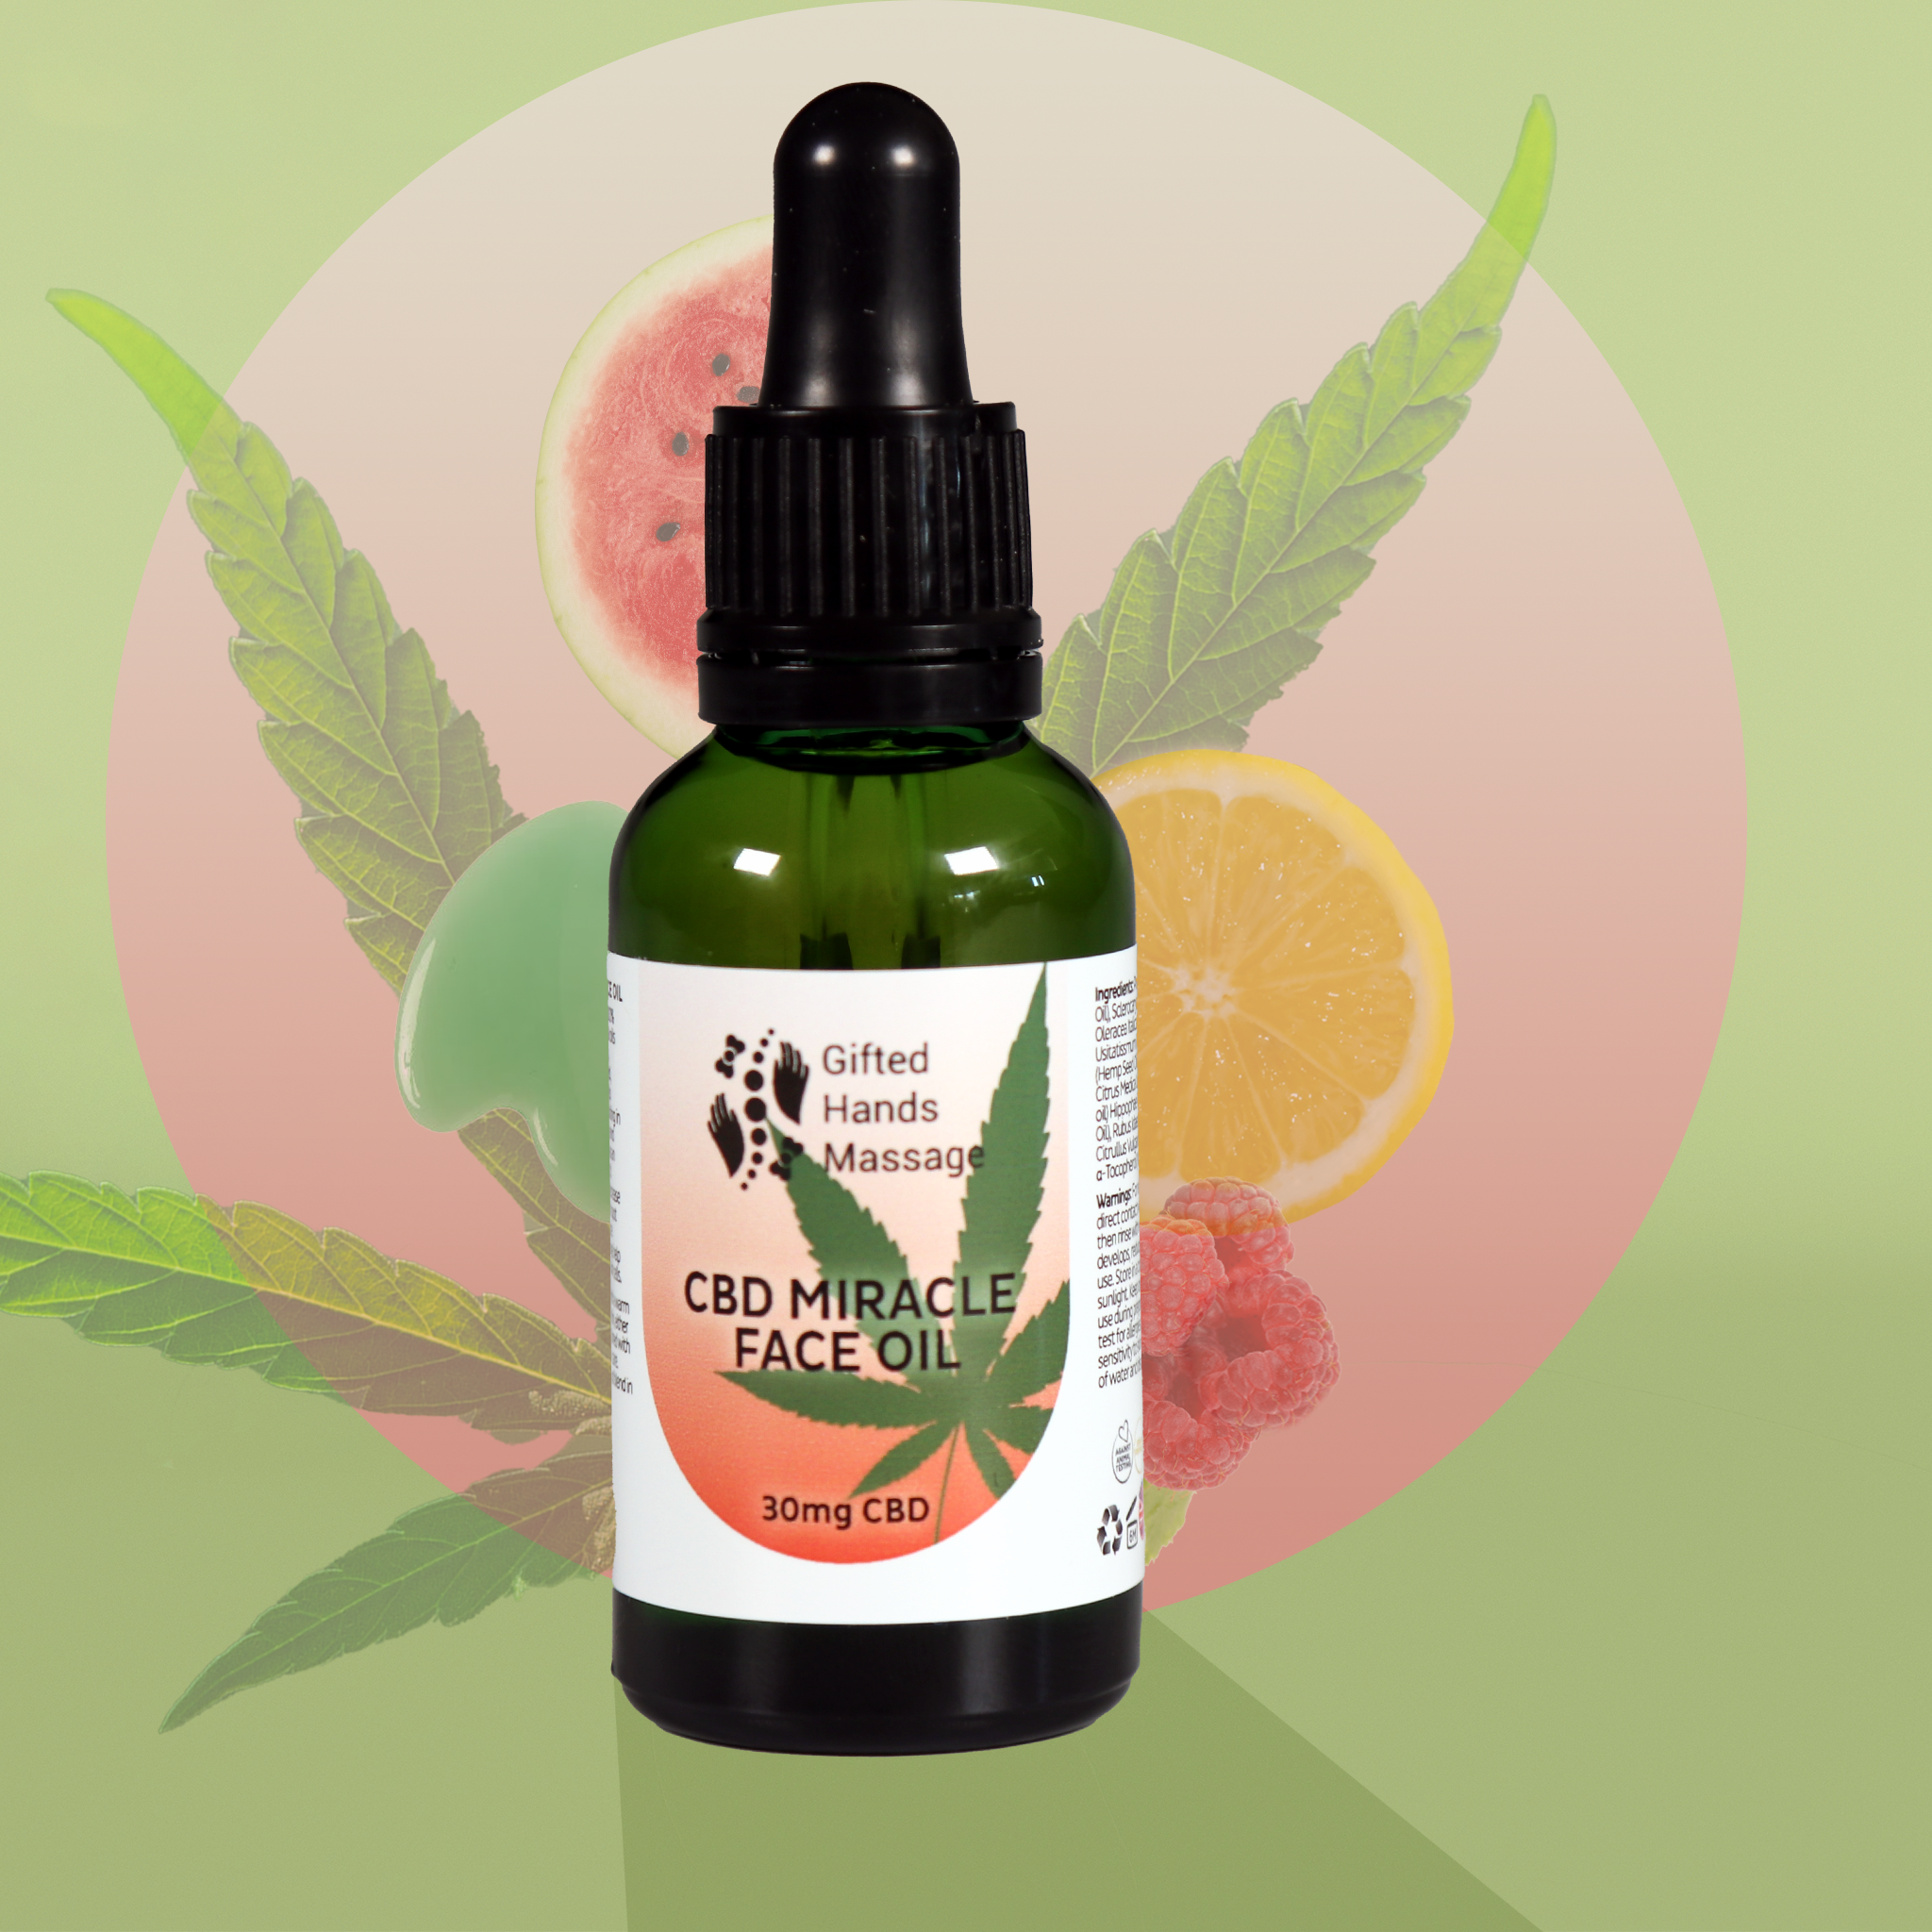 Gifted Hands CBD Miracle Face Oil | 30mg CBD